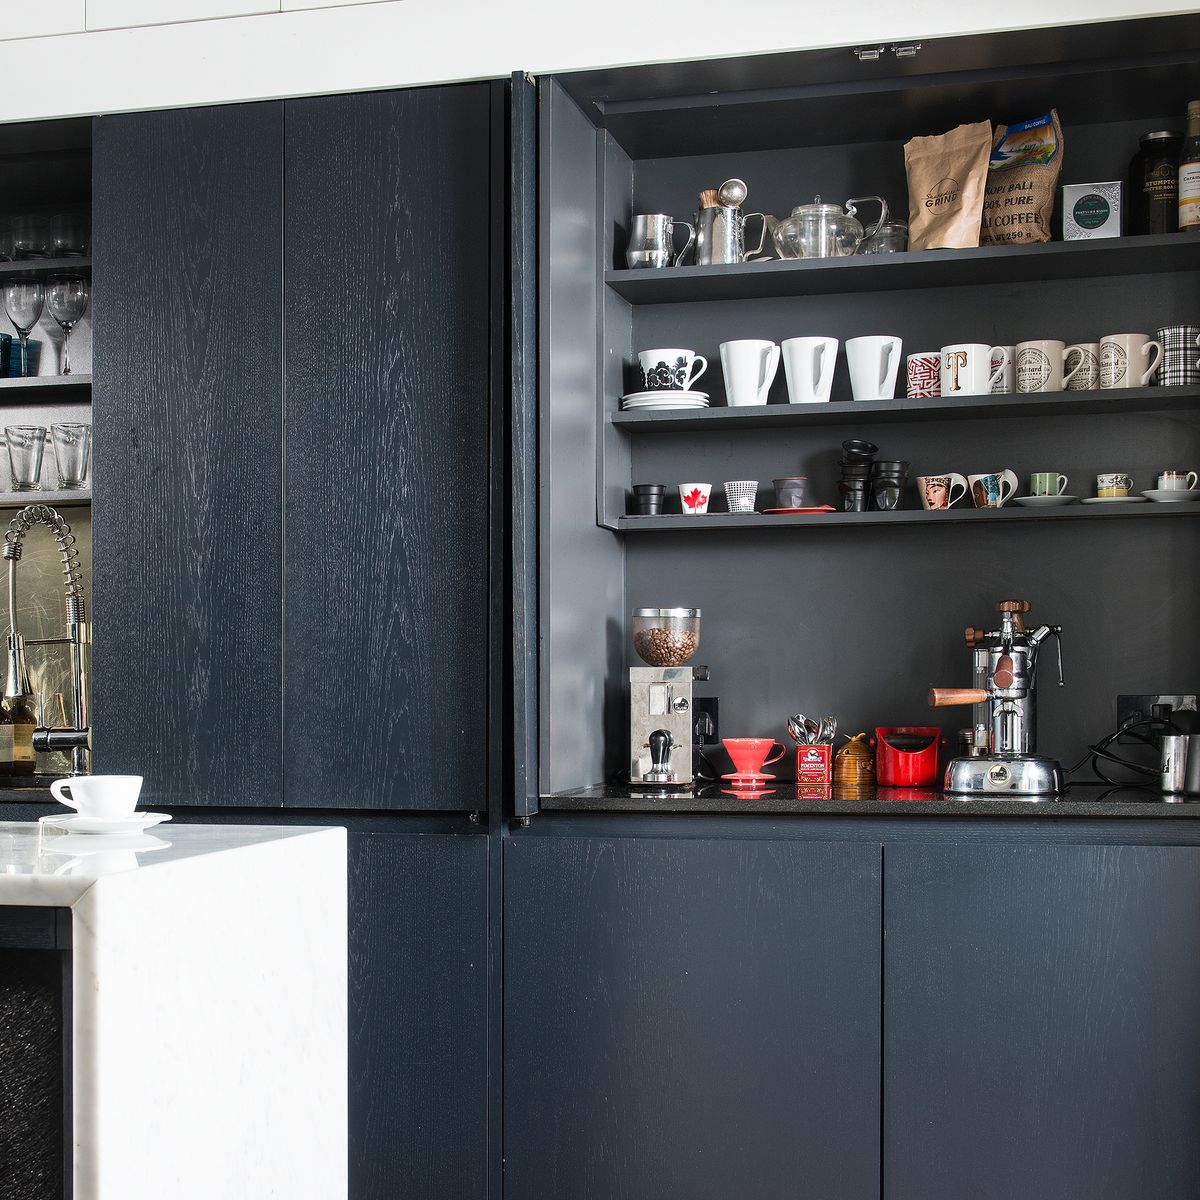 Coffee bar ideas - set up your own cafe station at home